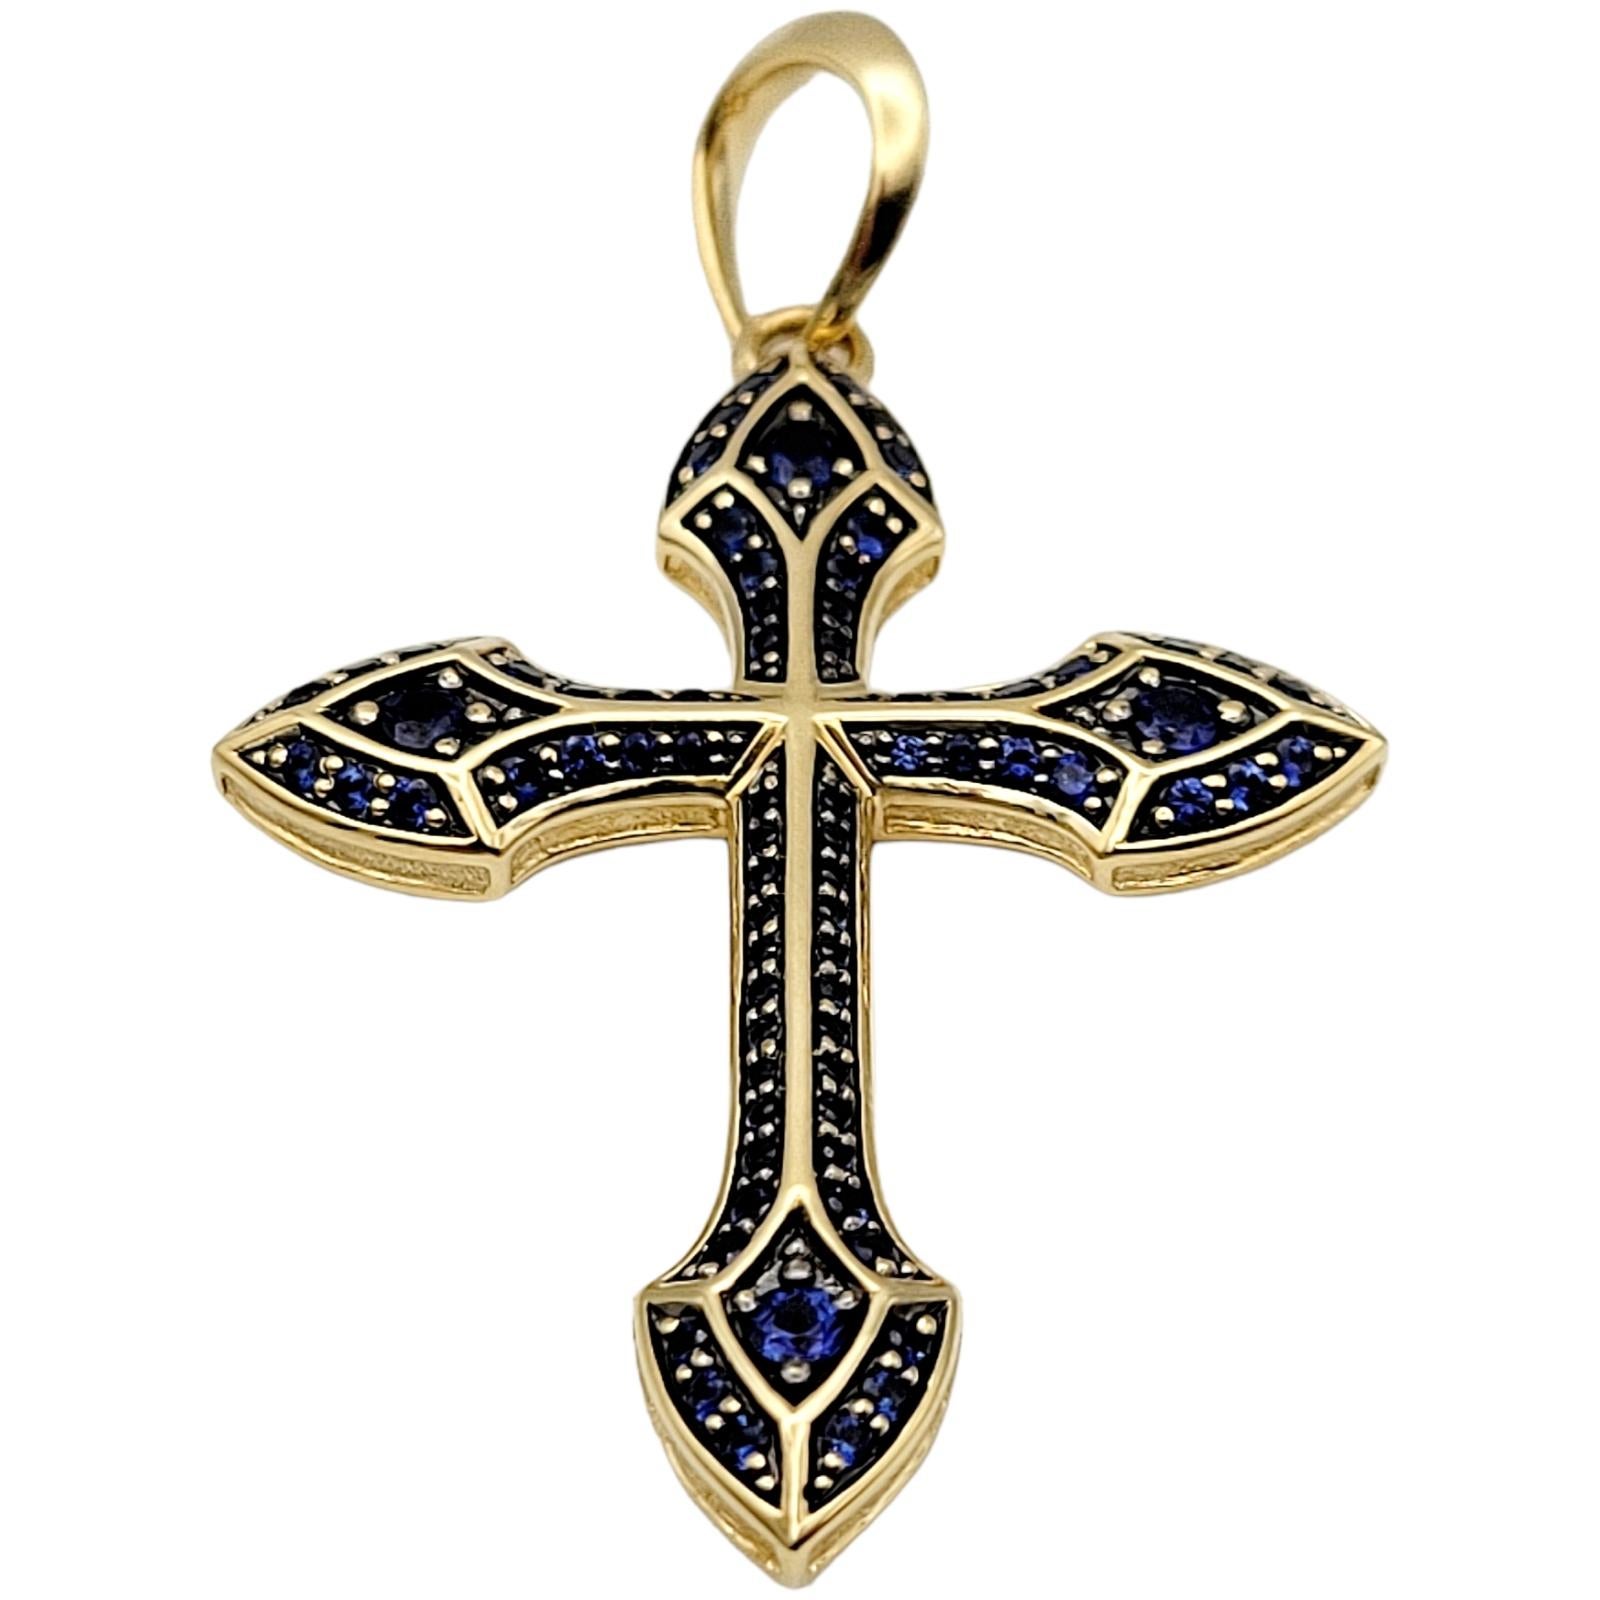 Introducing the alluring David Yurman Gothic Cross Amulet with Natural Sapphires in 18 Karat Yellow Gold. This exquisite piece combines spirituality and contemporary style, making it a true statement accessory for the modern man. Crafted by the